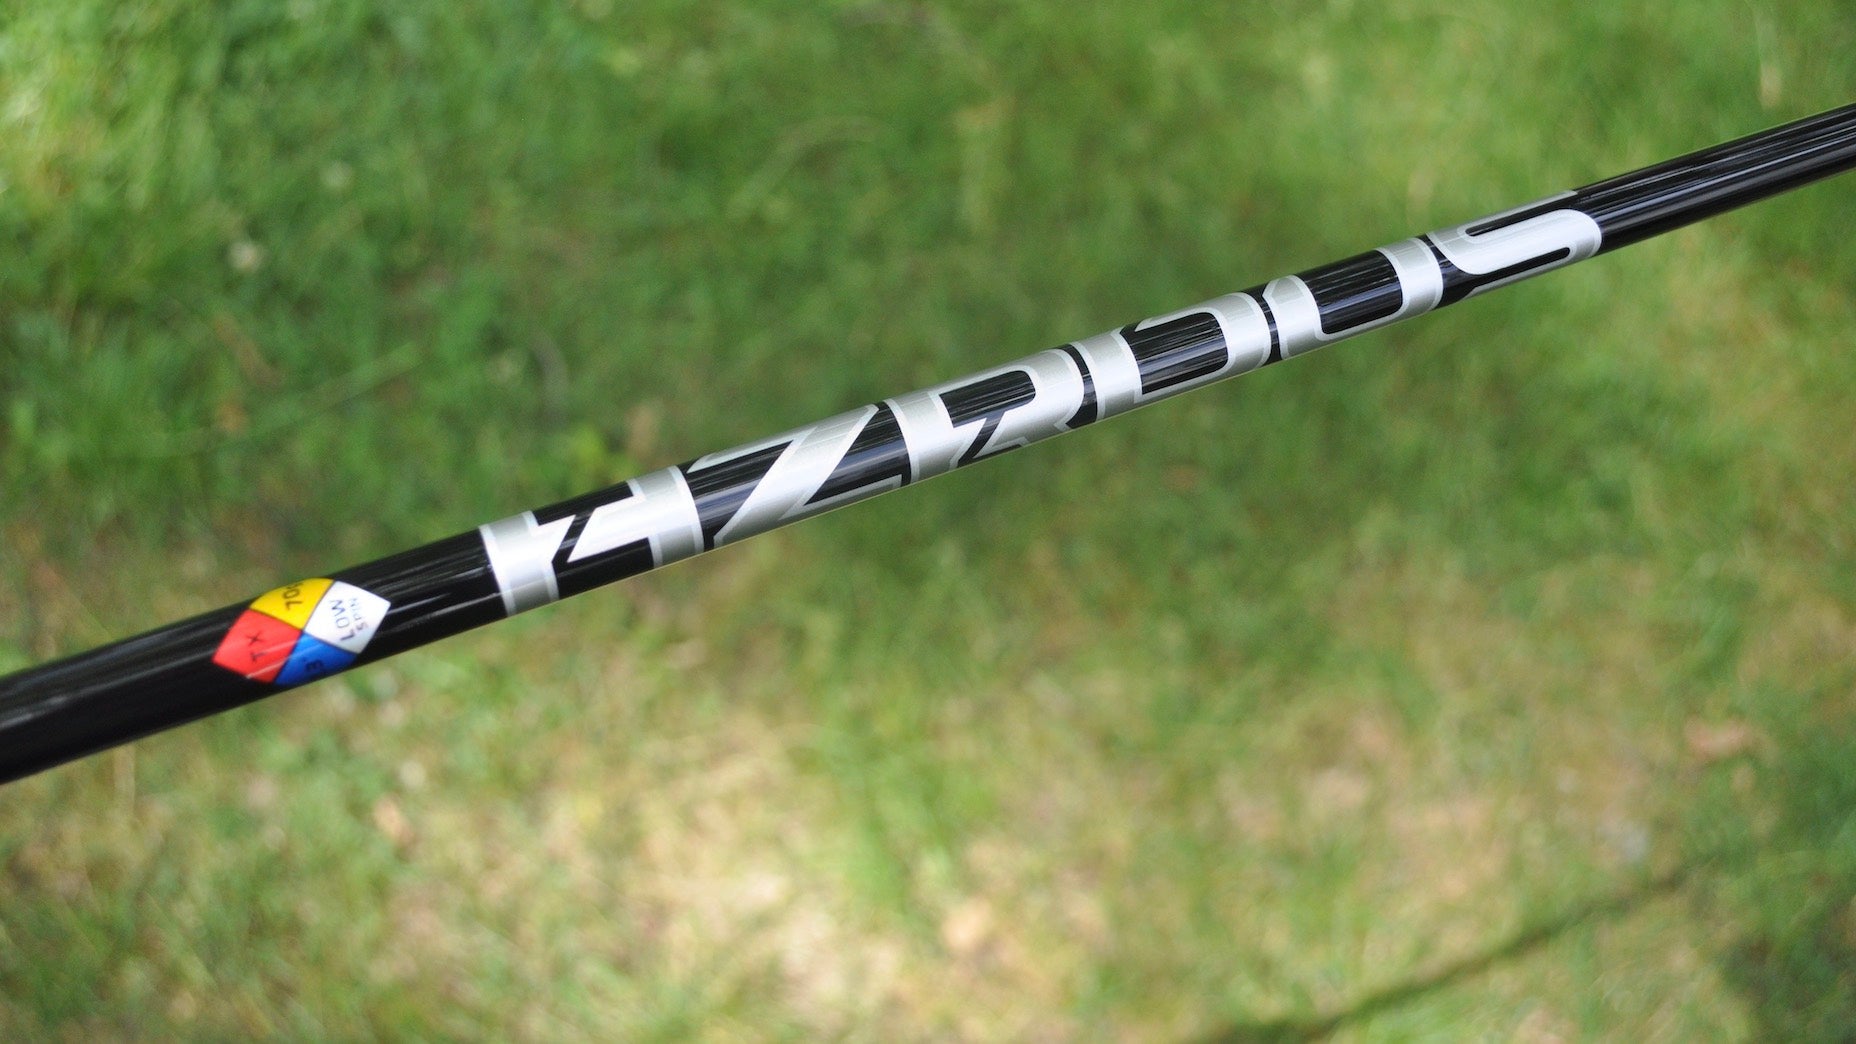 New version of Project X HZRDUS Black shaft surfaces on Tour | Spotted